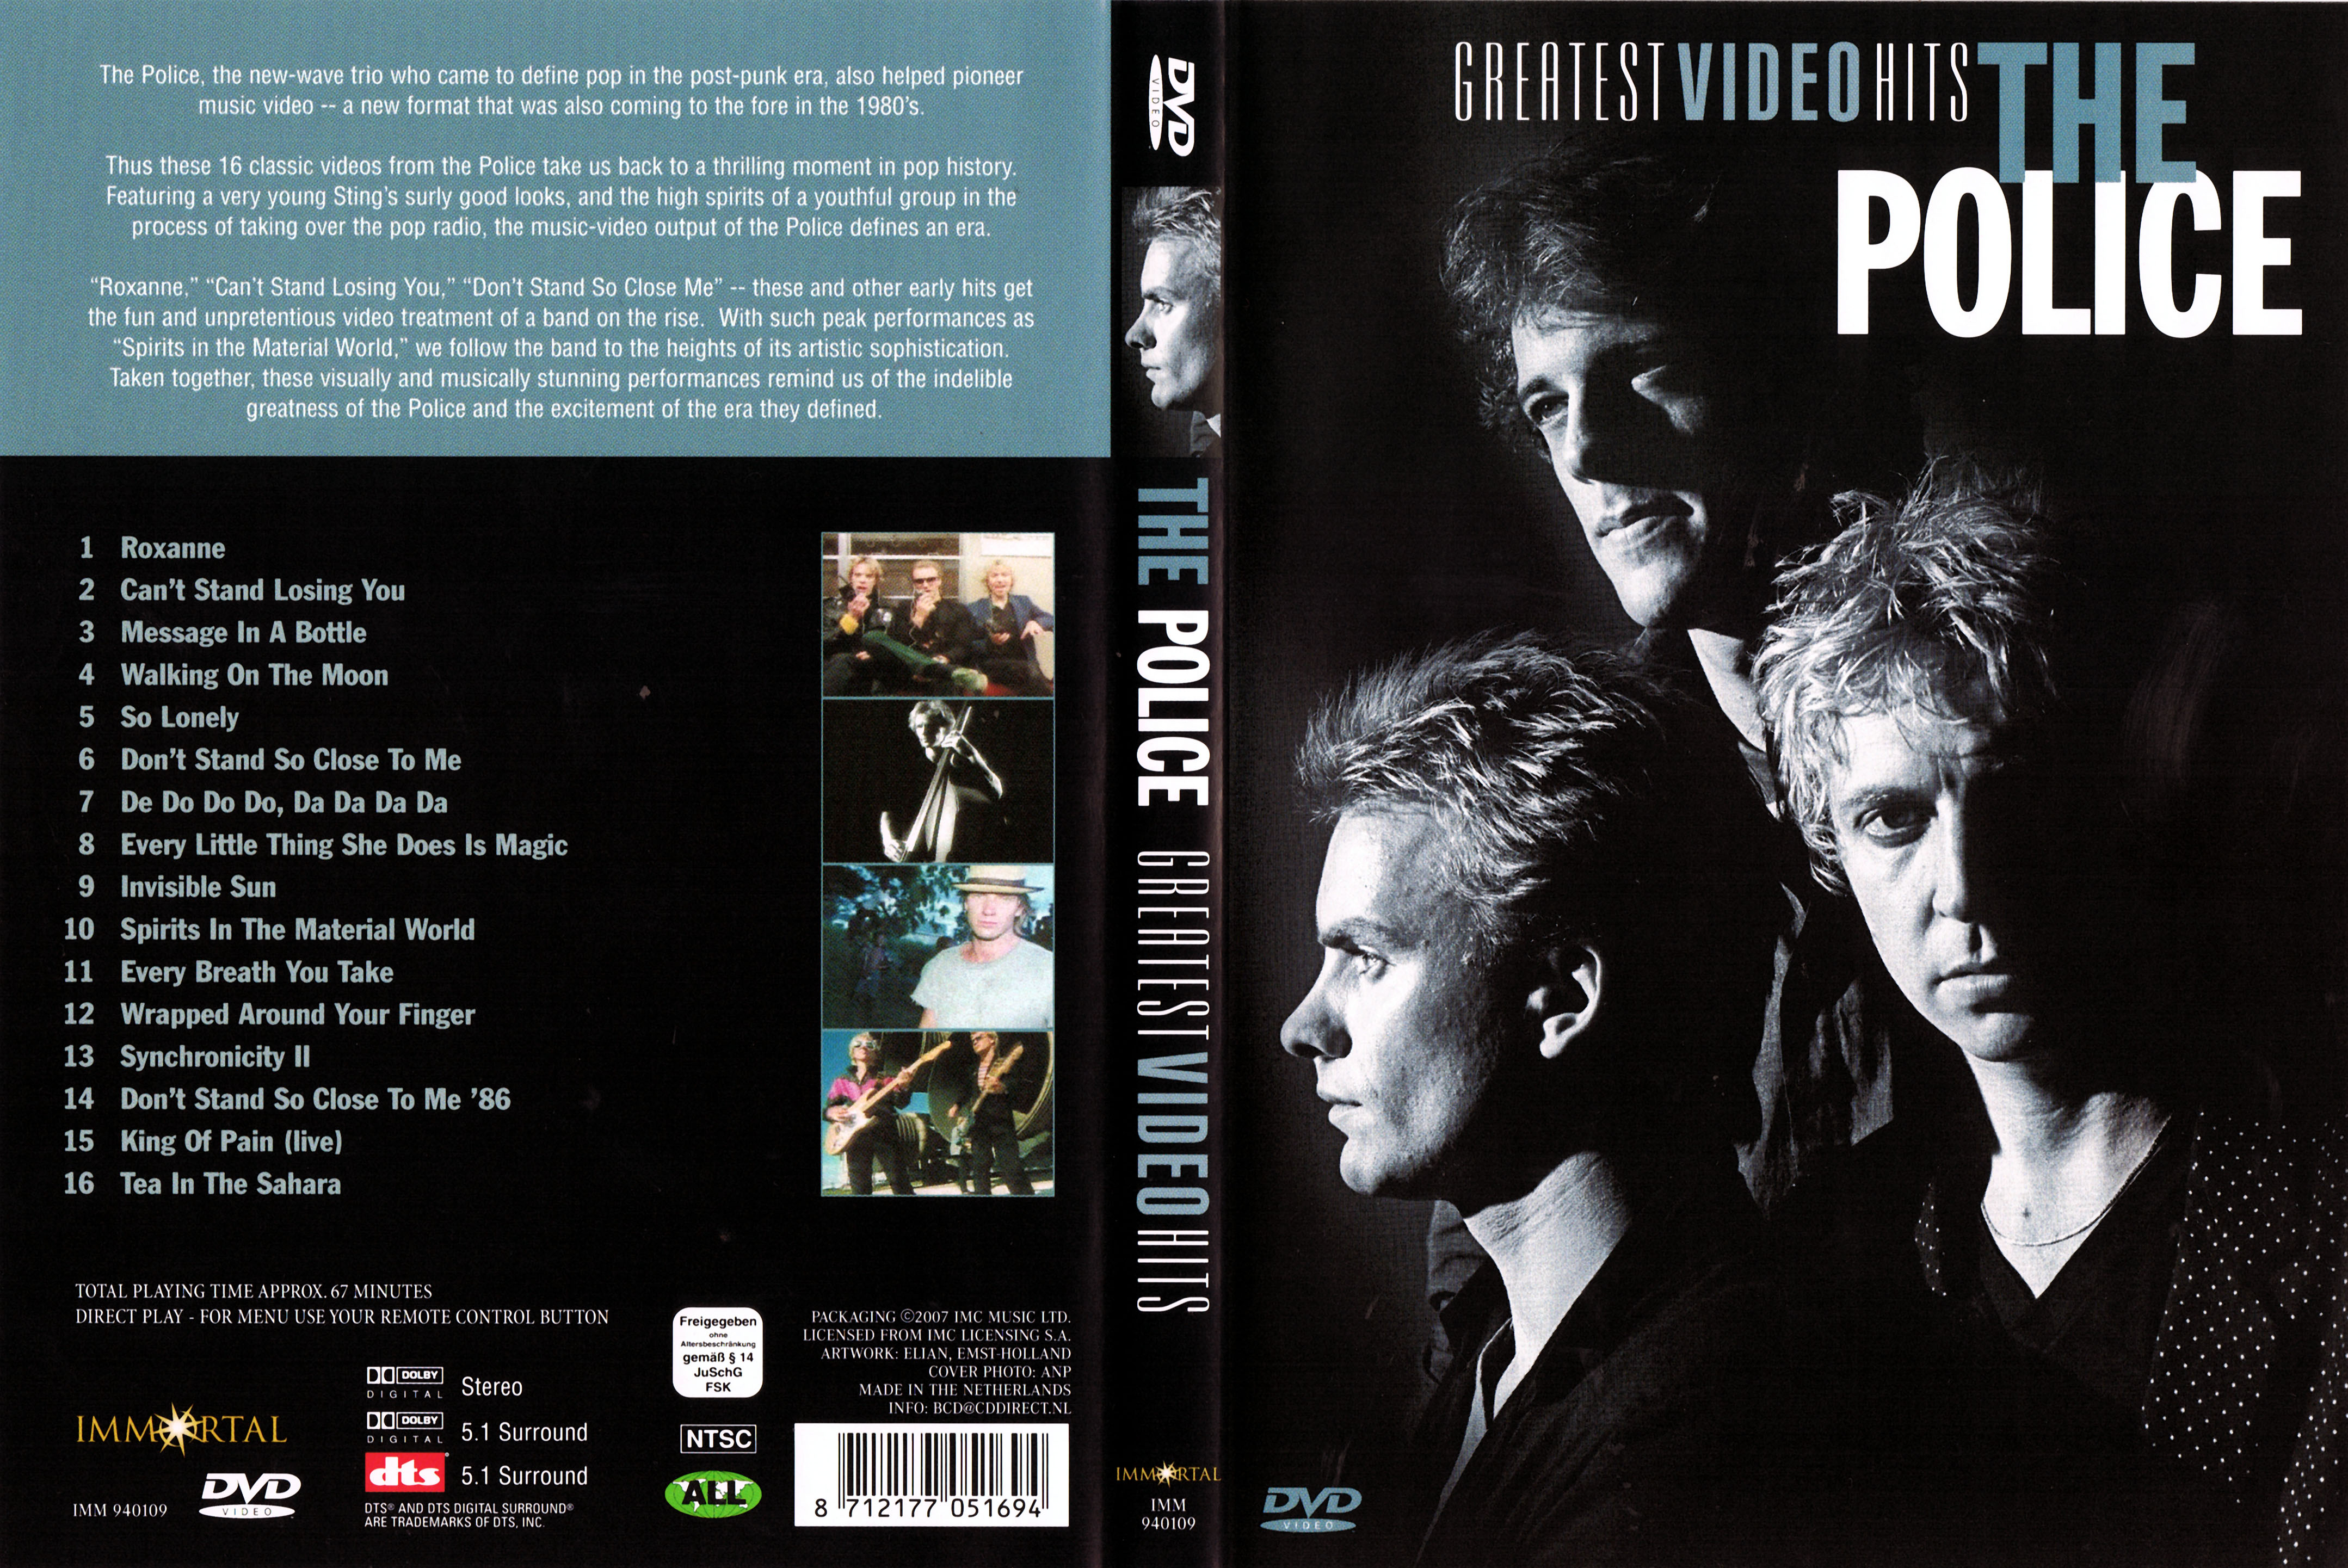 Jaquette DVD The police - Greatest video hits